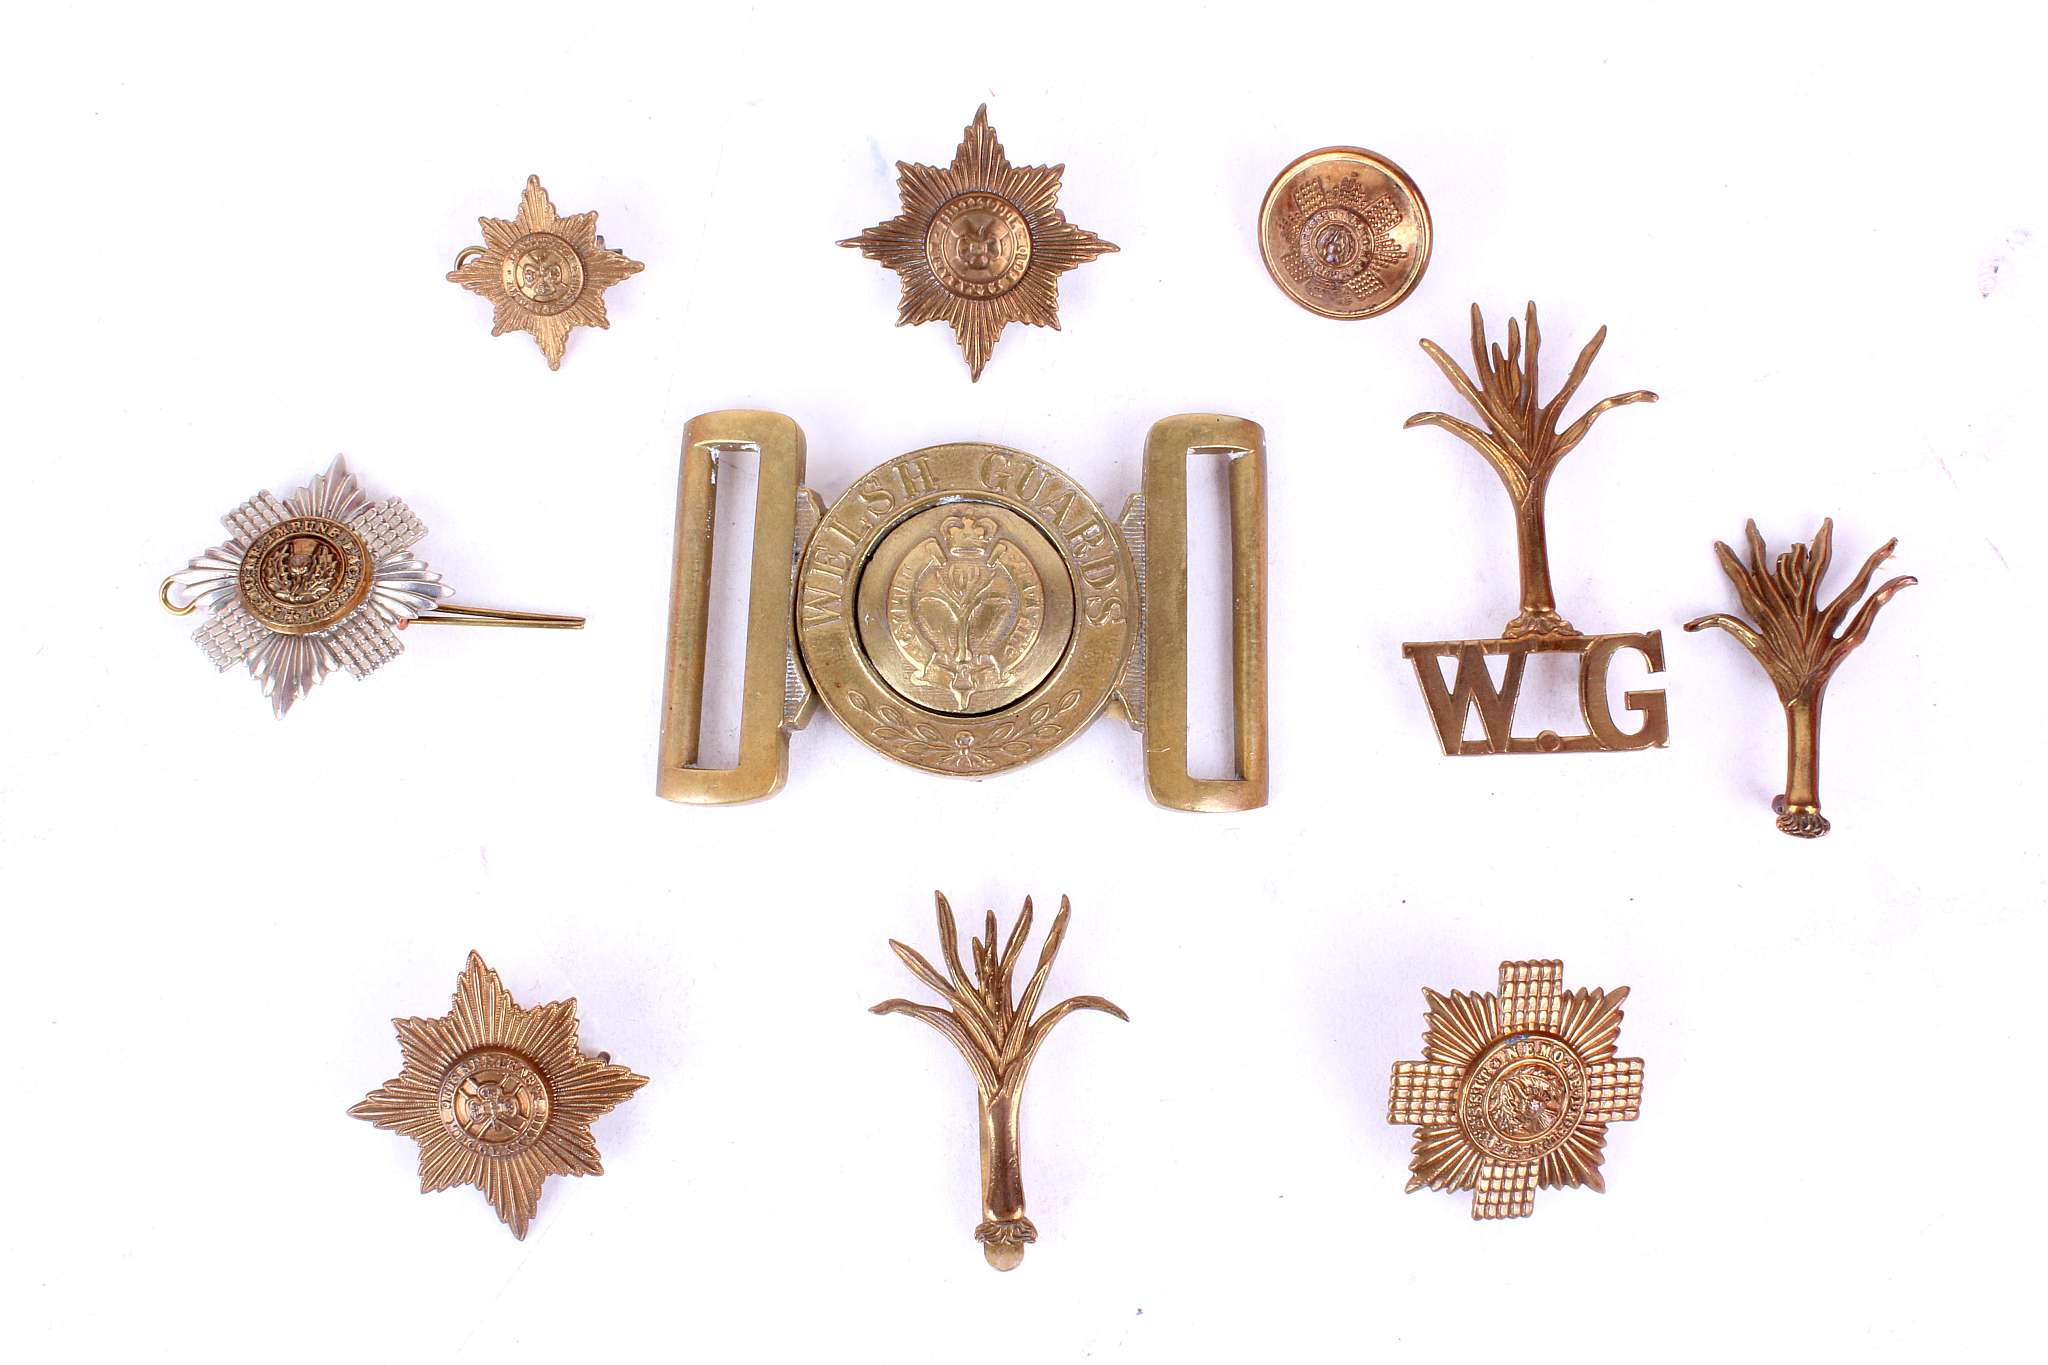 Welsh Guards belt buckle, other titles and cap badges including Scots Guards, also British Army - Image 3 of 4